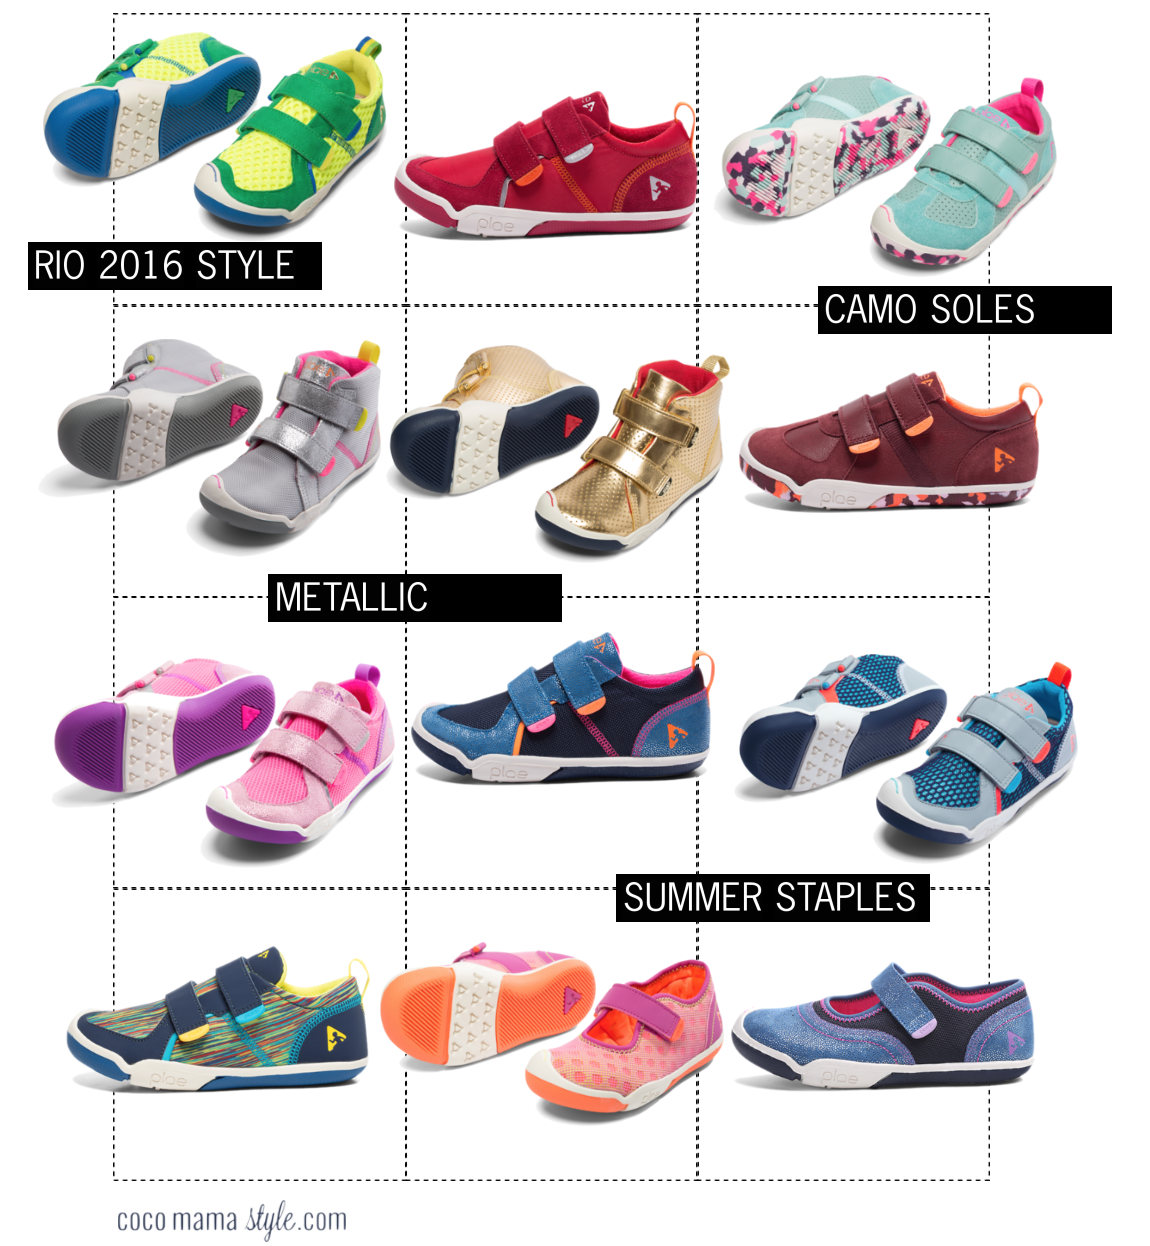 coco mama style | mini style | kids shoes | childrens | PLAE UK shoes